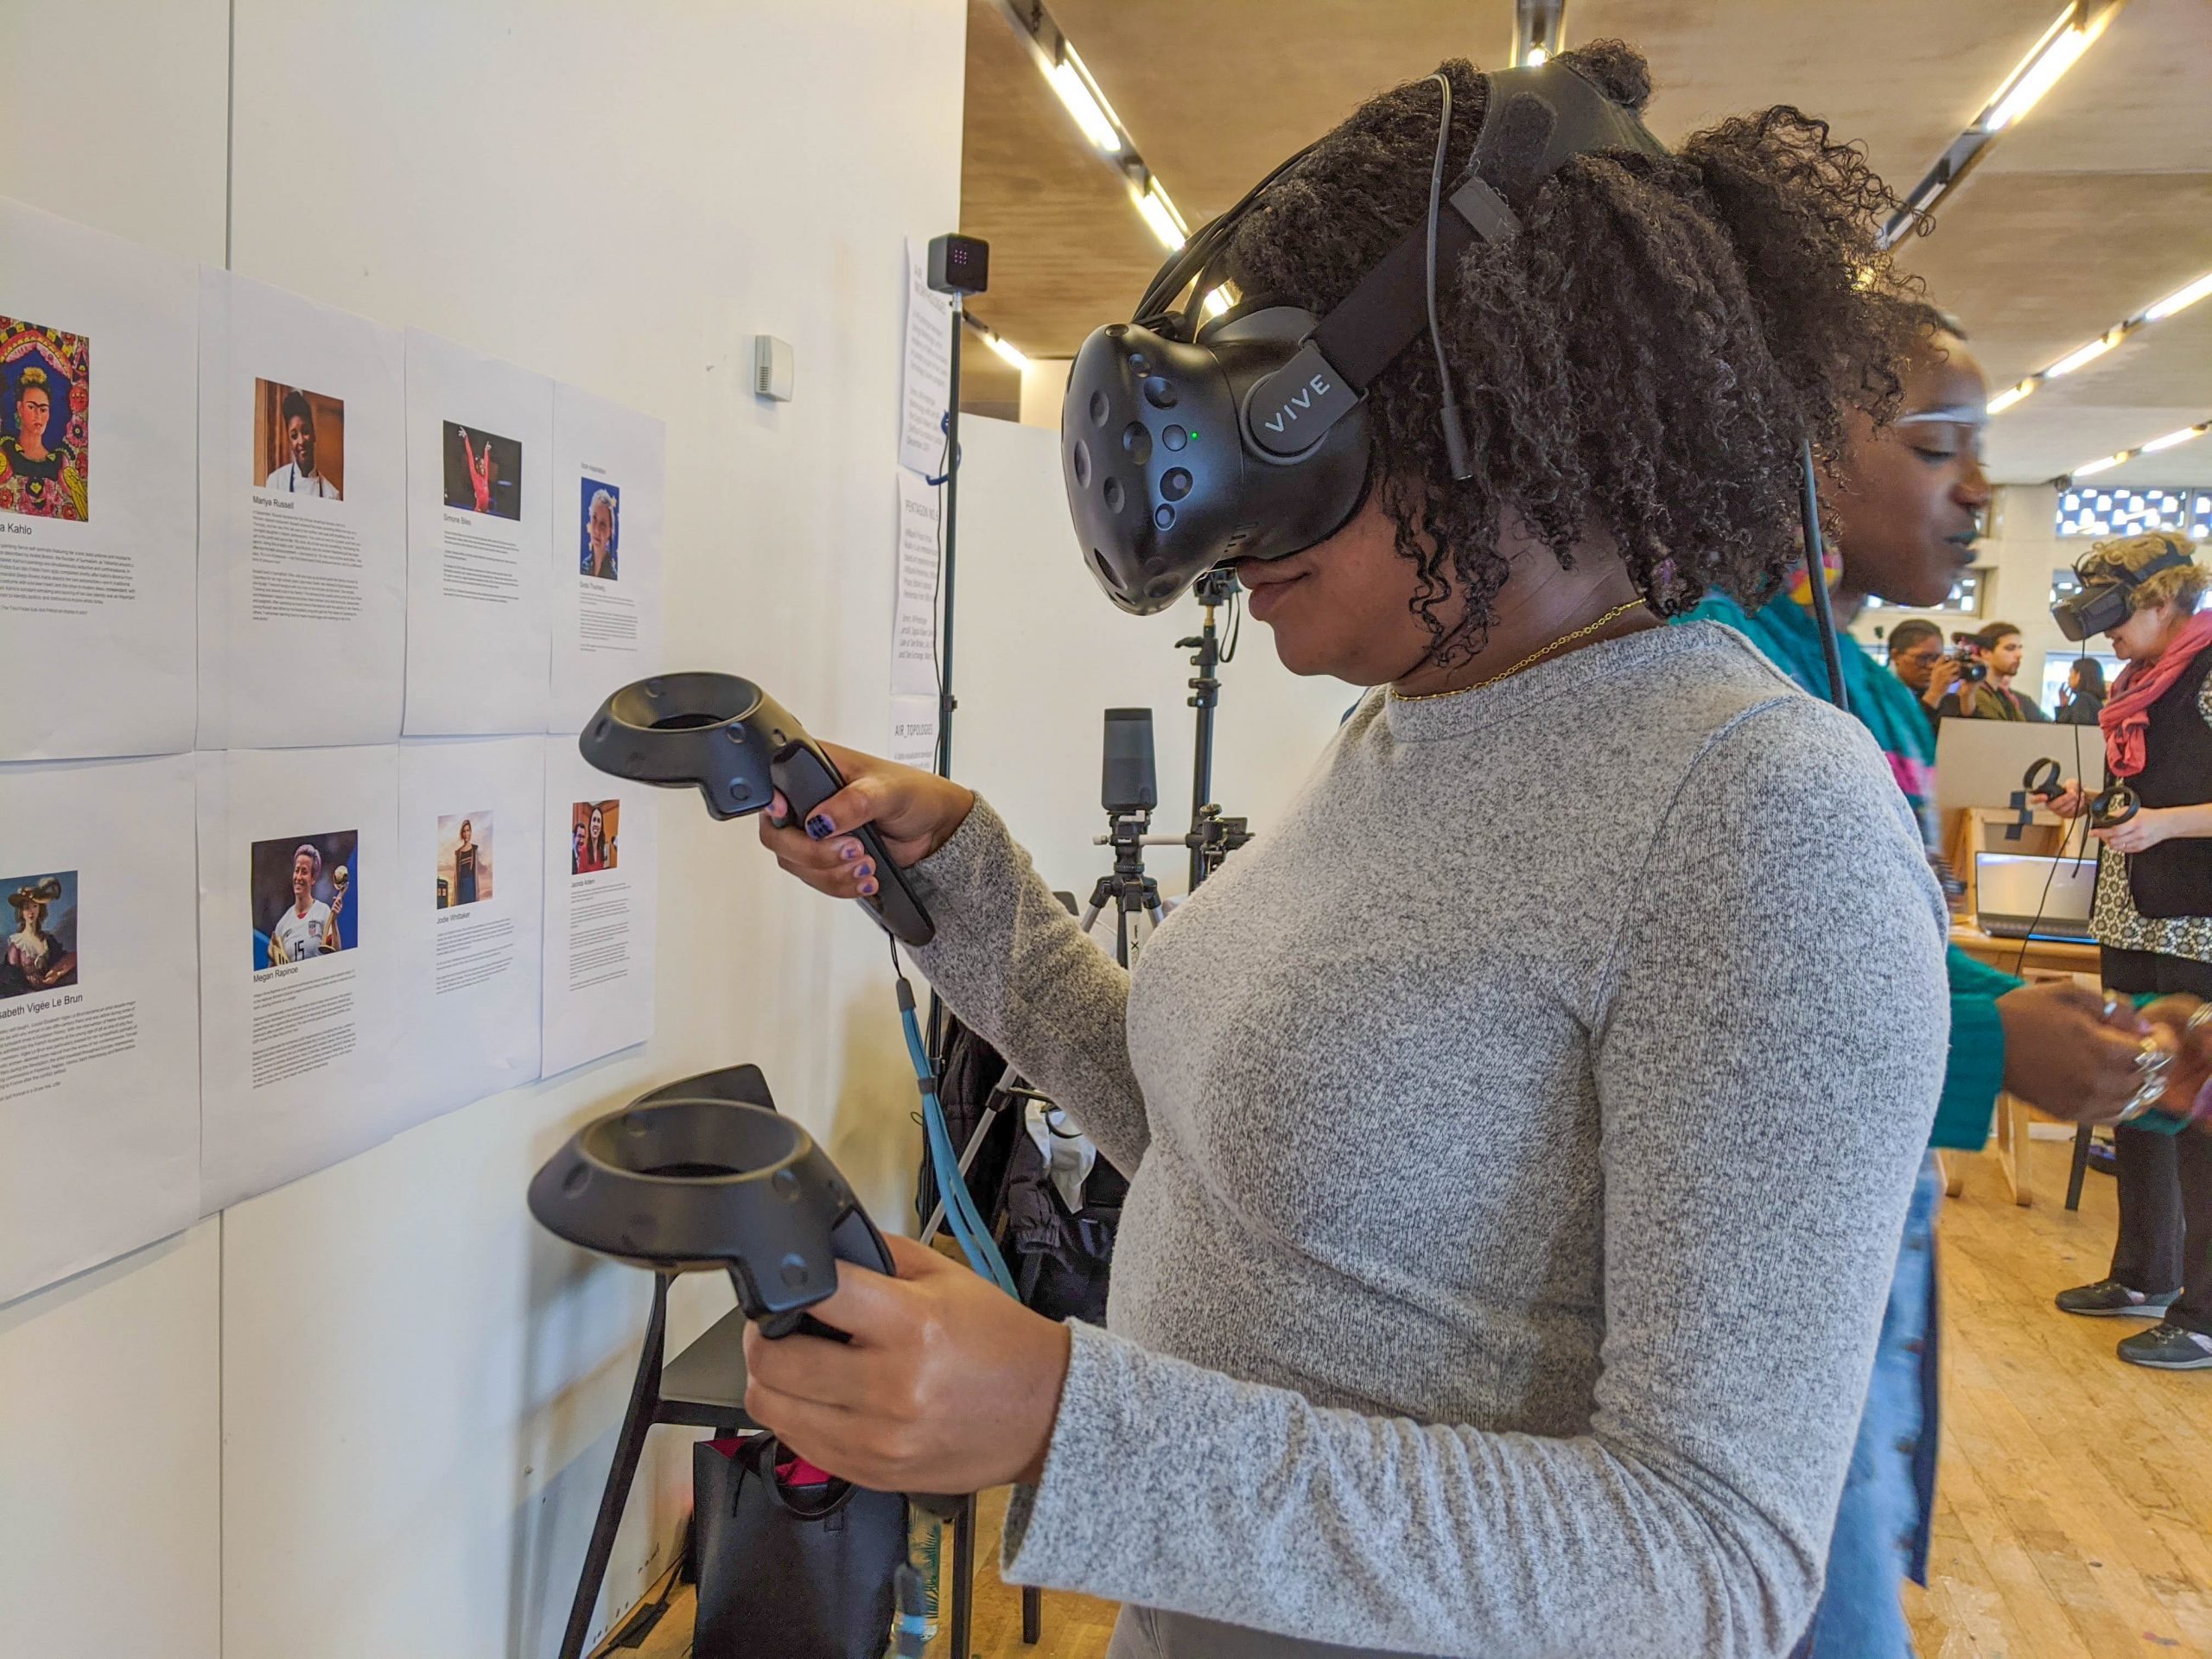 black woman wearing VR headset and holding controllers in front of a wall of images